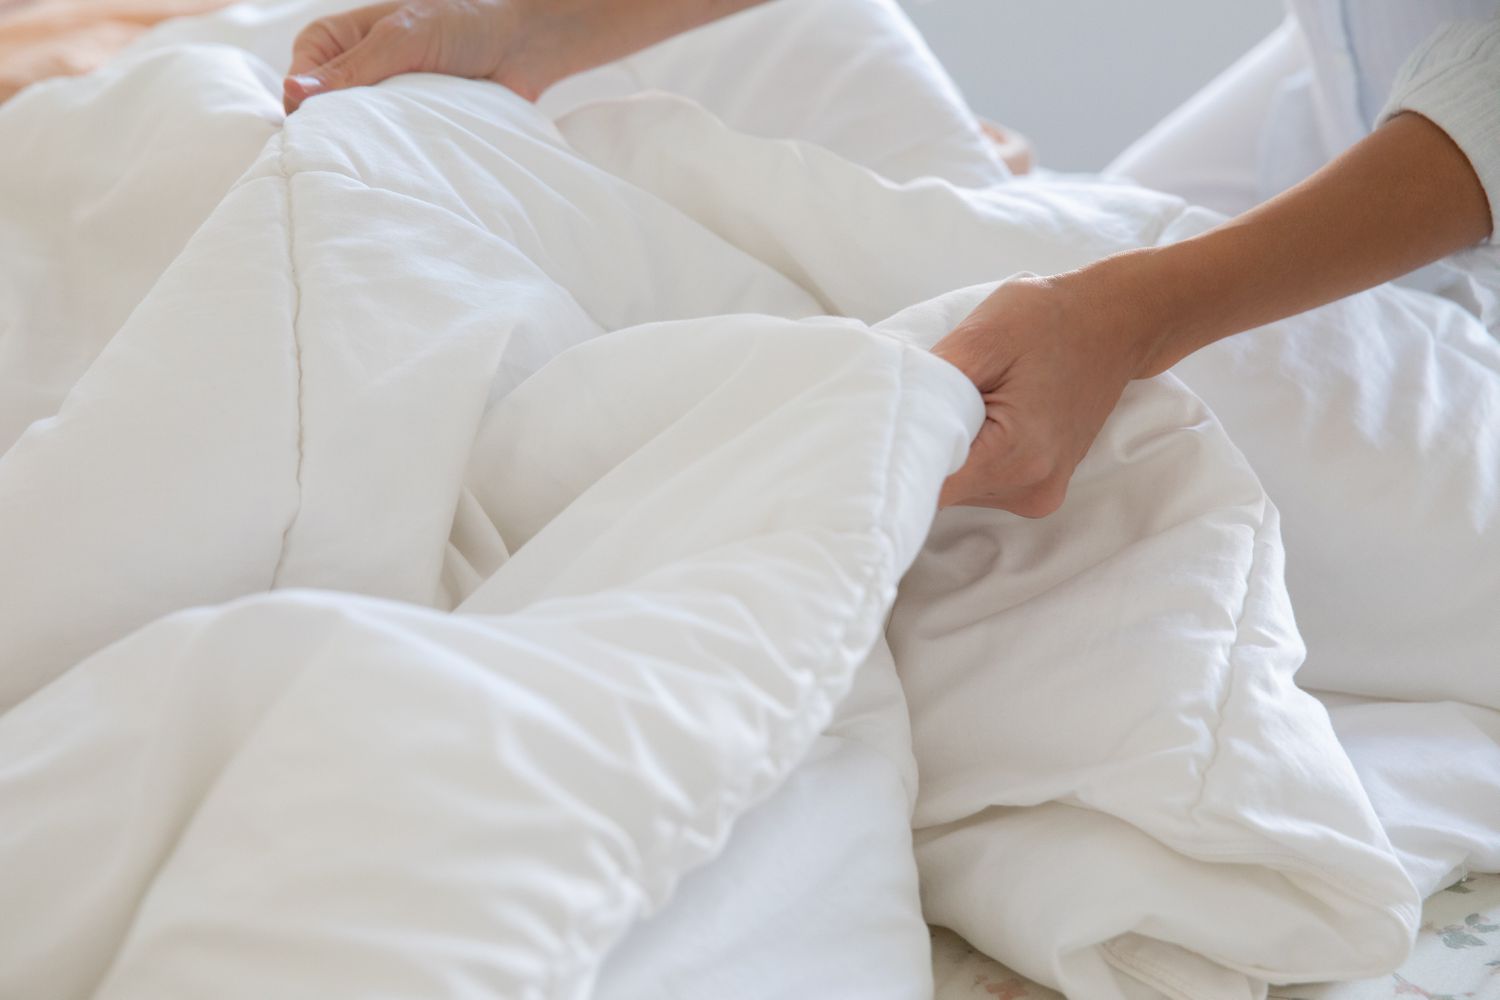 How Often Should You Wash Your Sheets? Probably More Than You Think